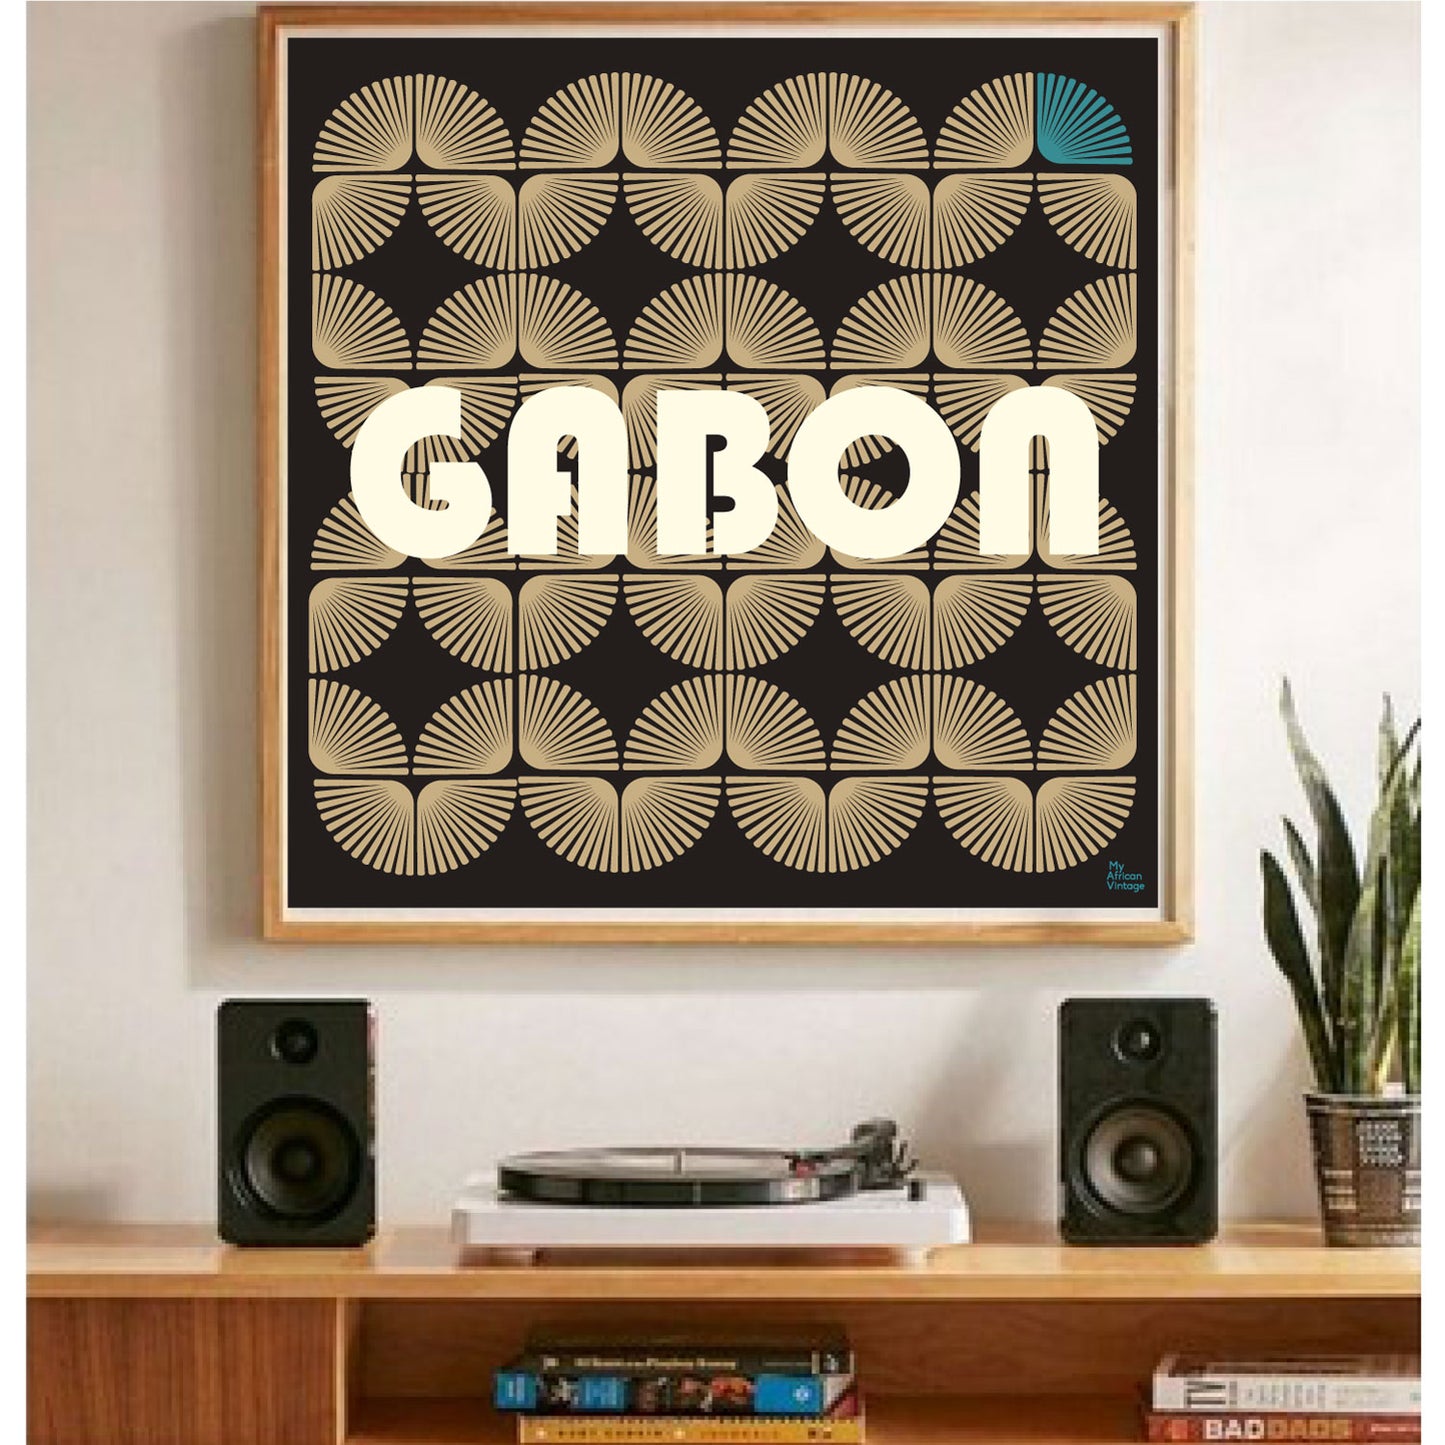 "Gabon" retro style poster - "My African Vintage" collection